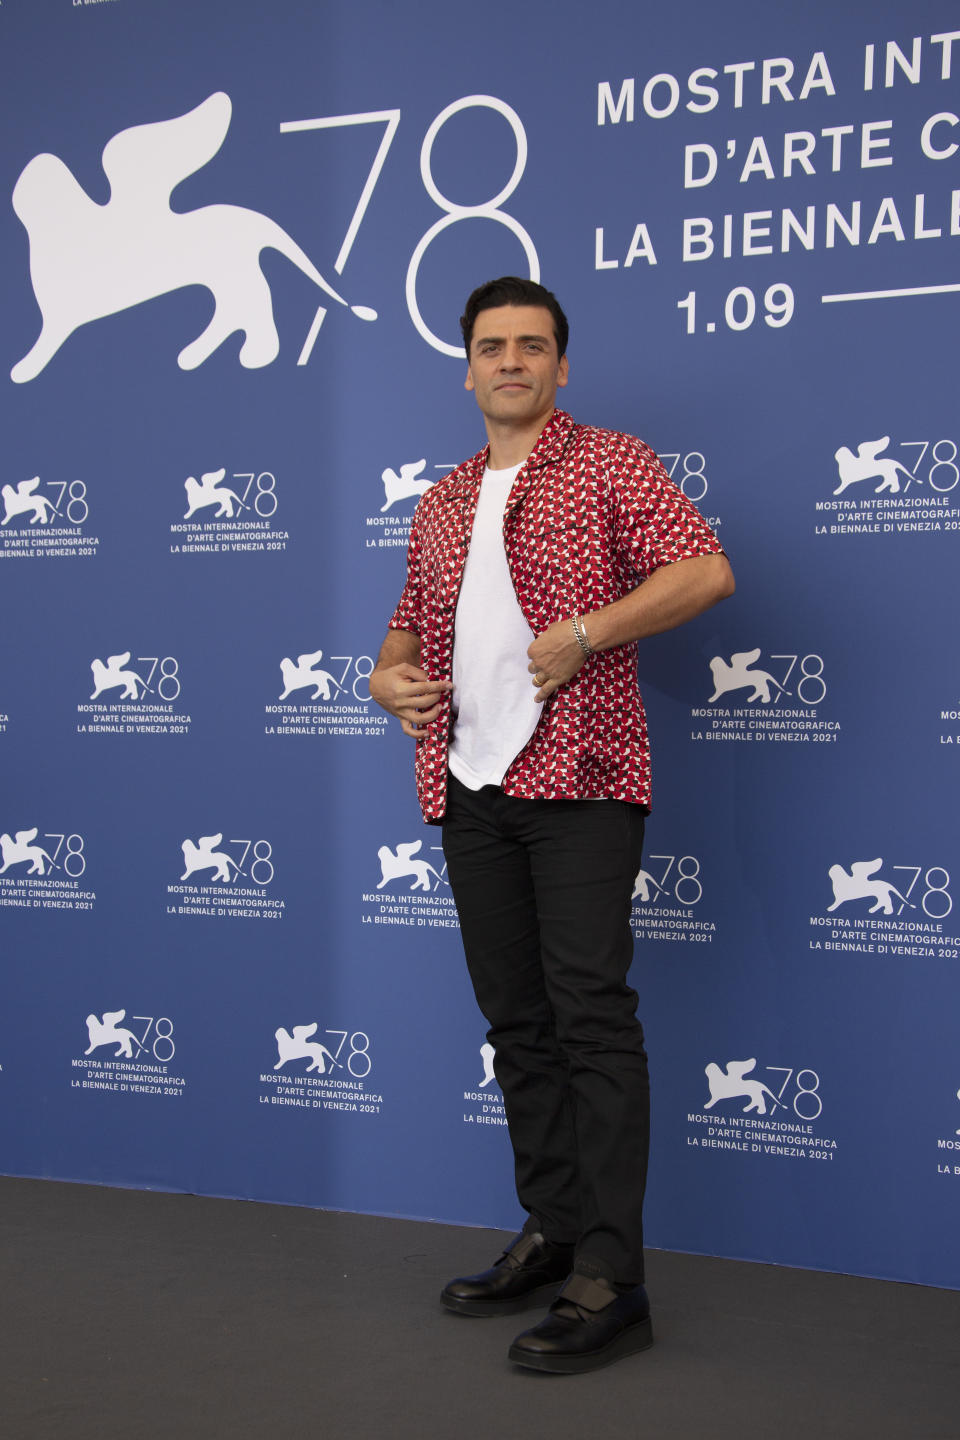 Oscar Isaac poses for photographers at the photo call for the film 'Scenes of a Marriage' during the 78th edition of the Venice Film Festival in Venice, Italy, Saturday, Sep, 4, 2021. (Photo by Joel C Ryan/Invision/AP)